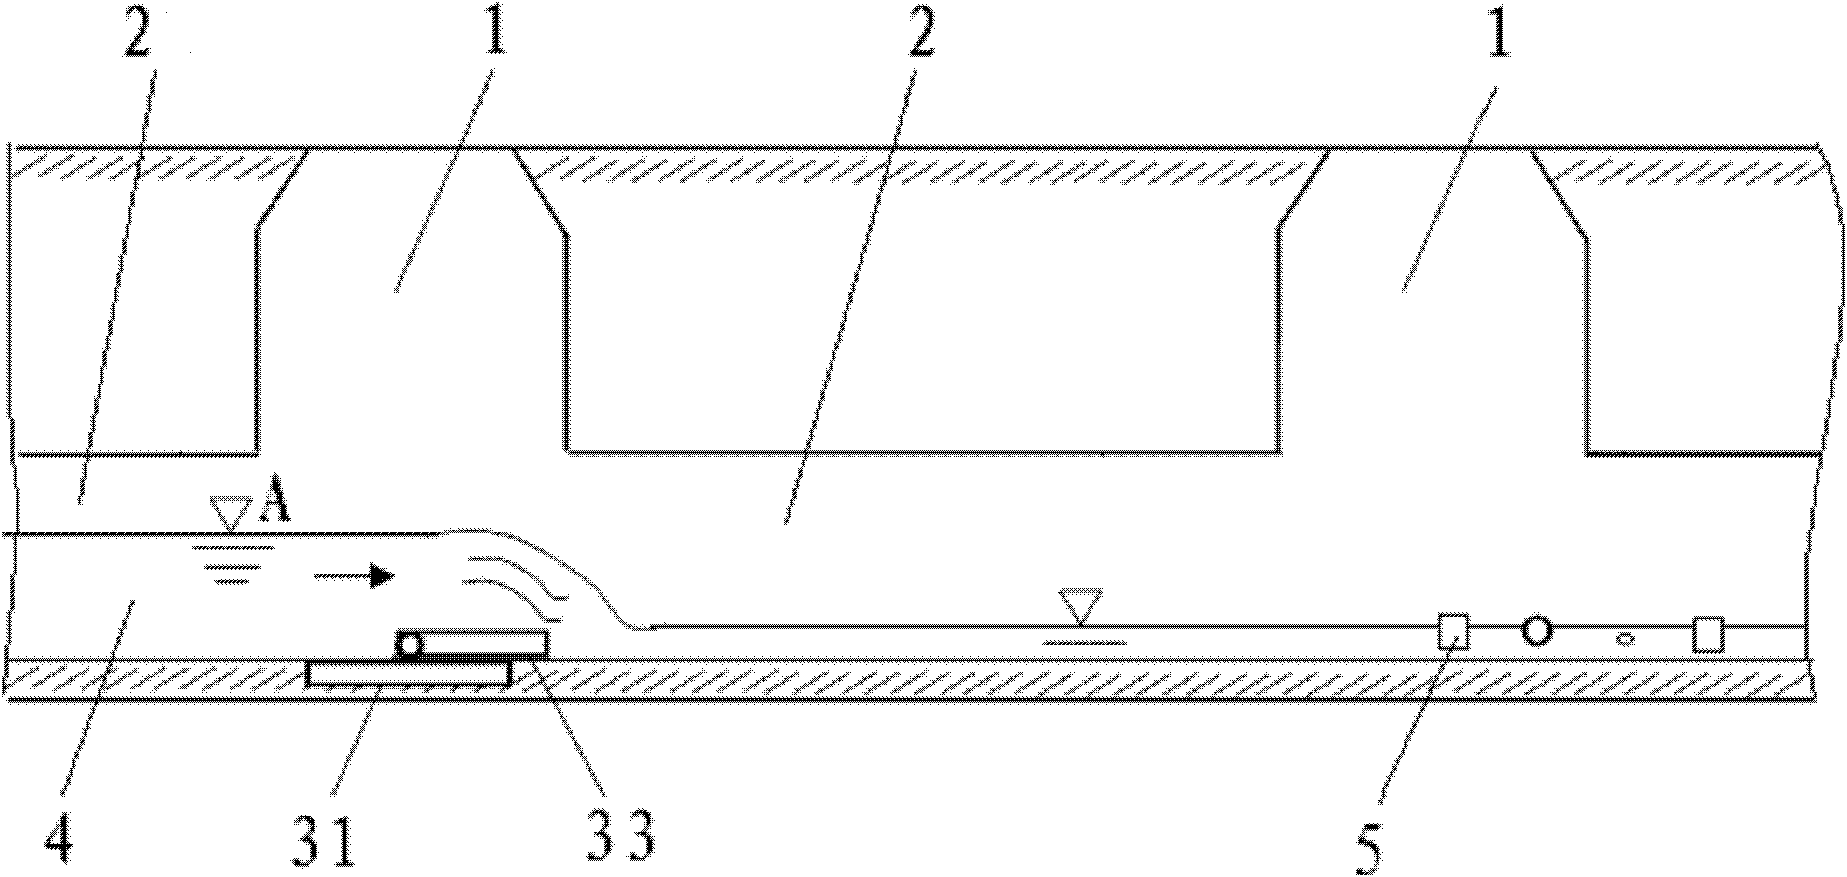 Automatic flushing device for urban drainage pipeline system